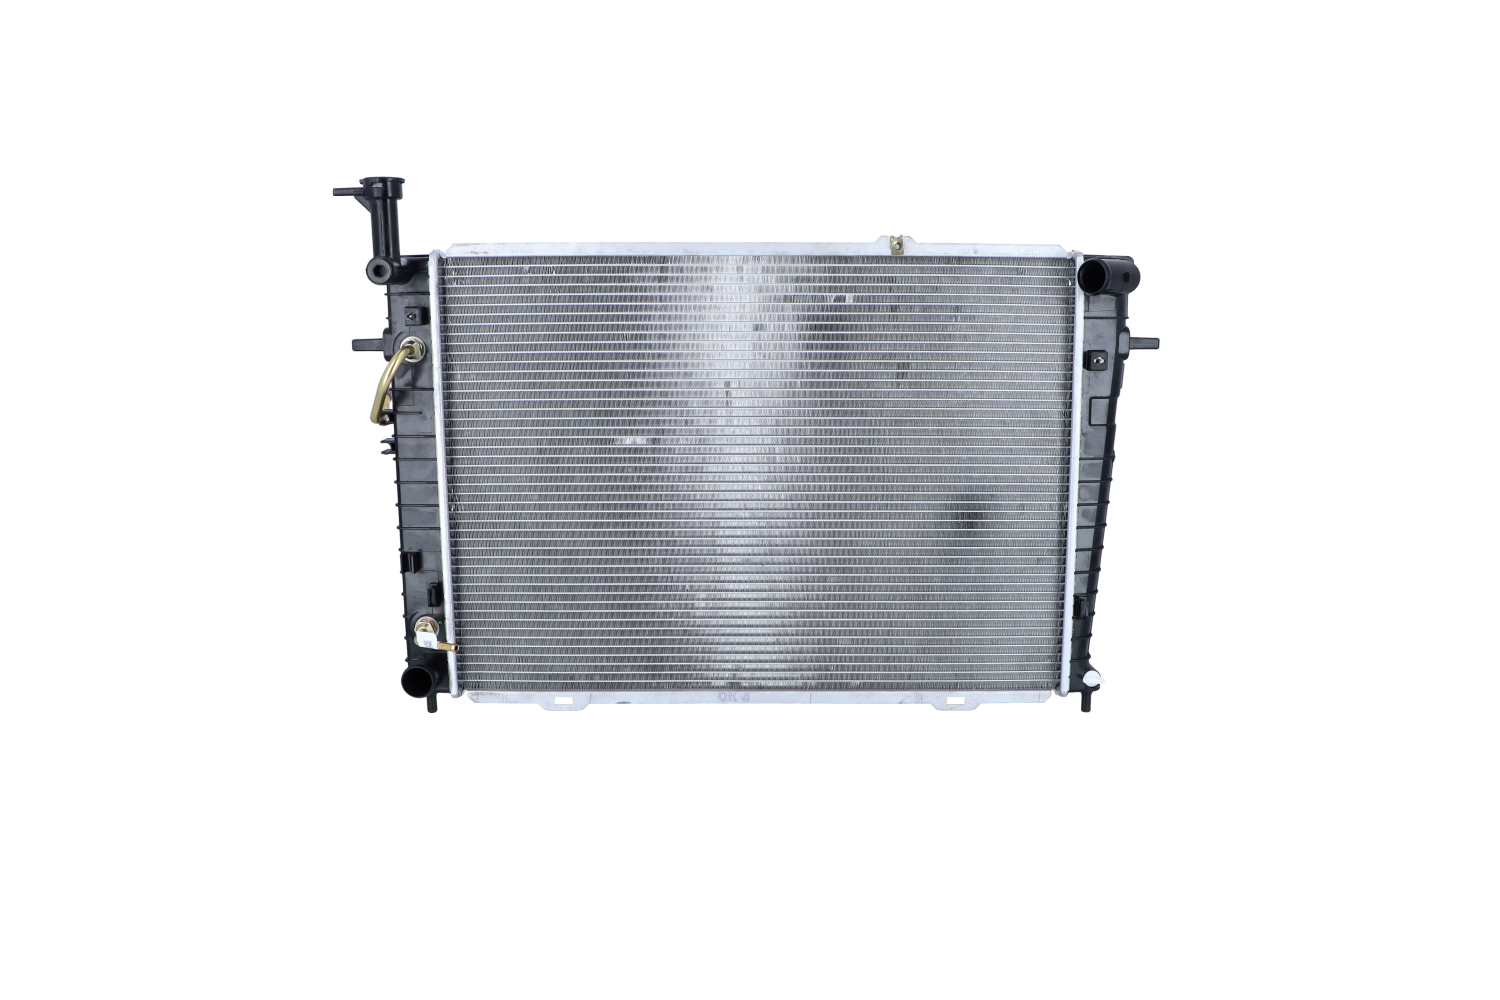 NRF 53342 Engine radiator Aluminium, 641 x 456 x 17 mm, with mounting parts, Brazed cooling fins